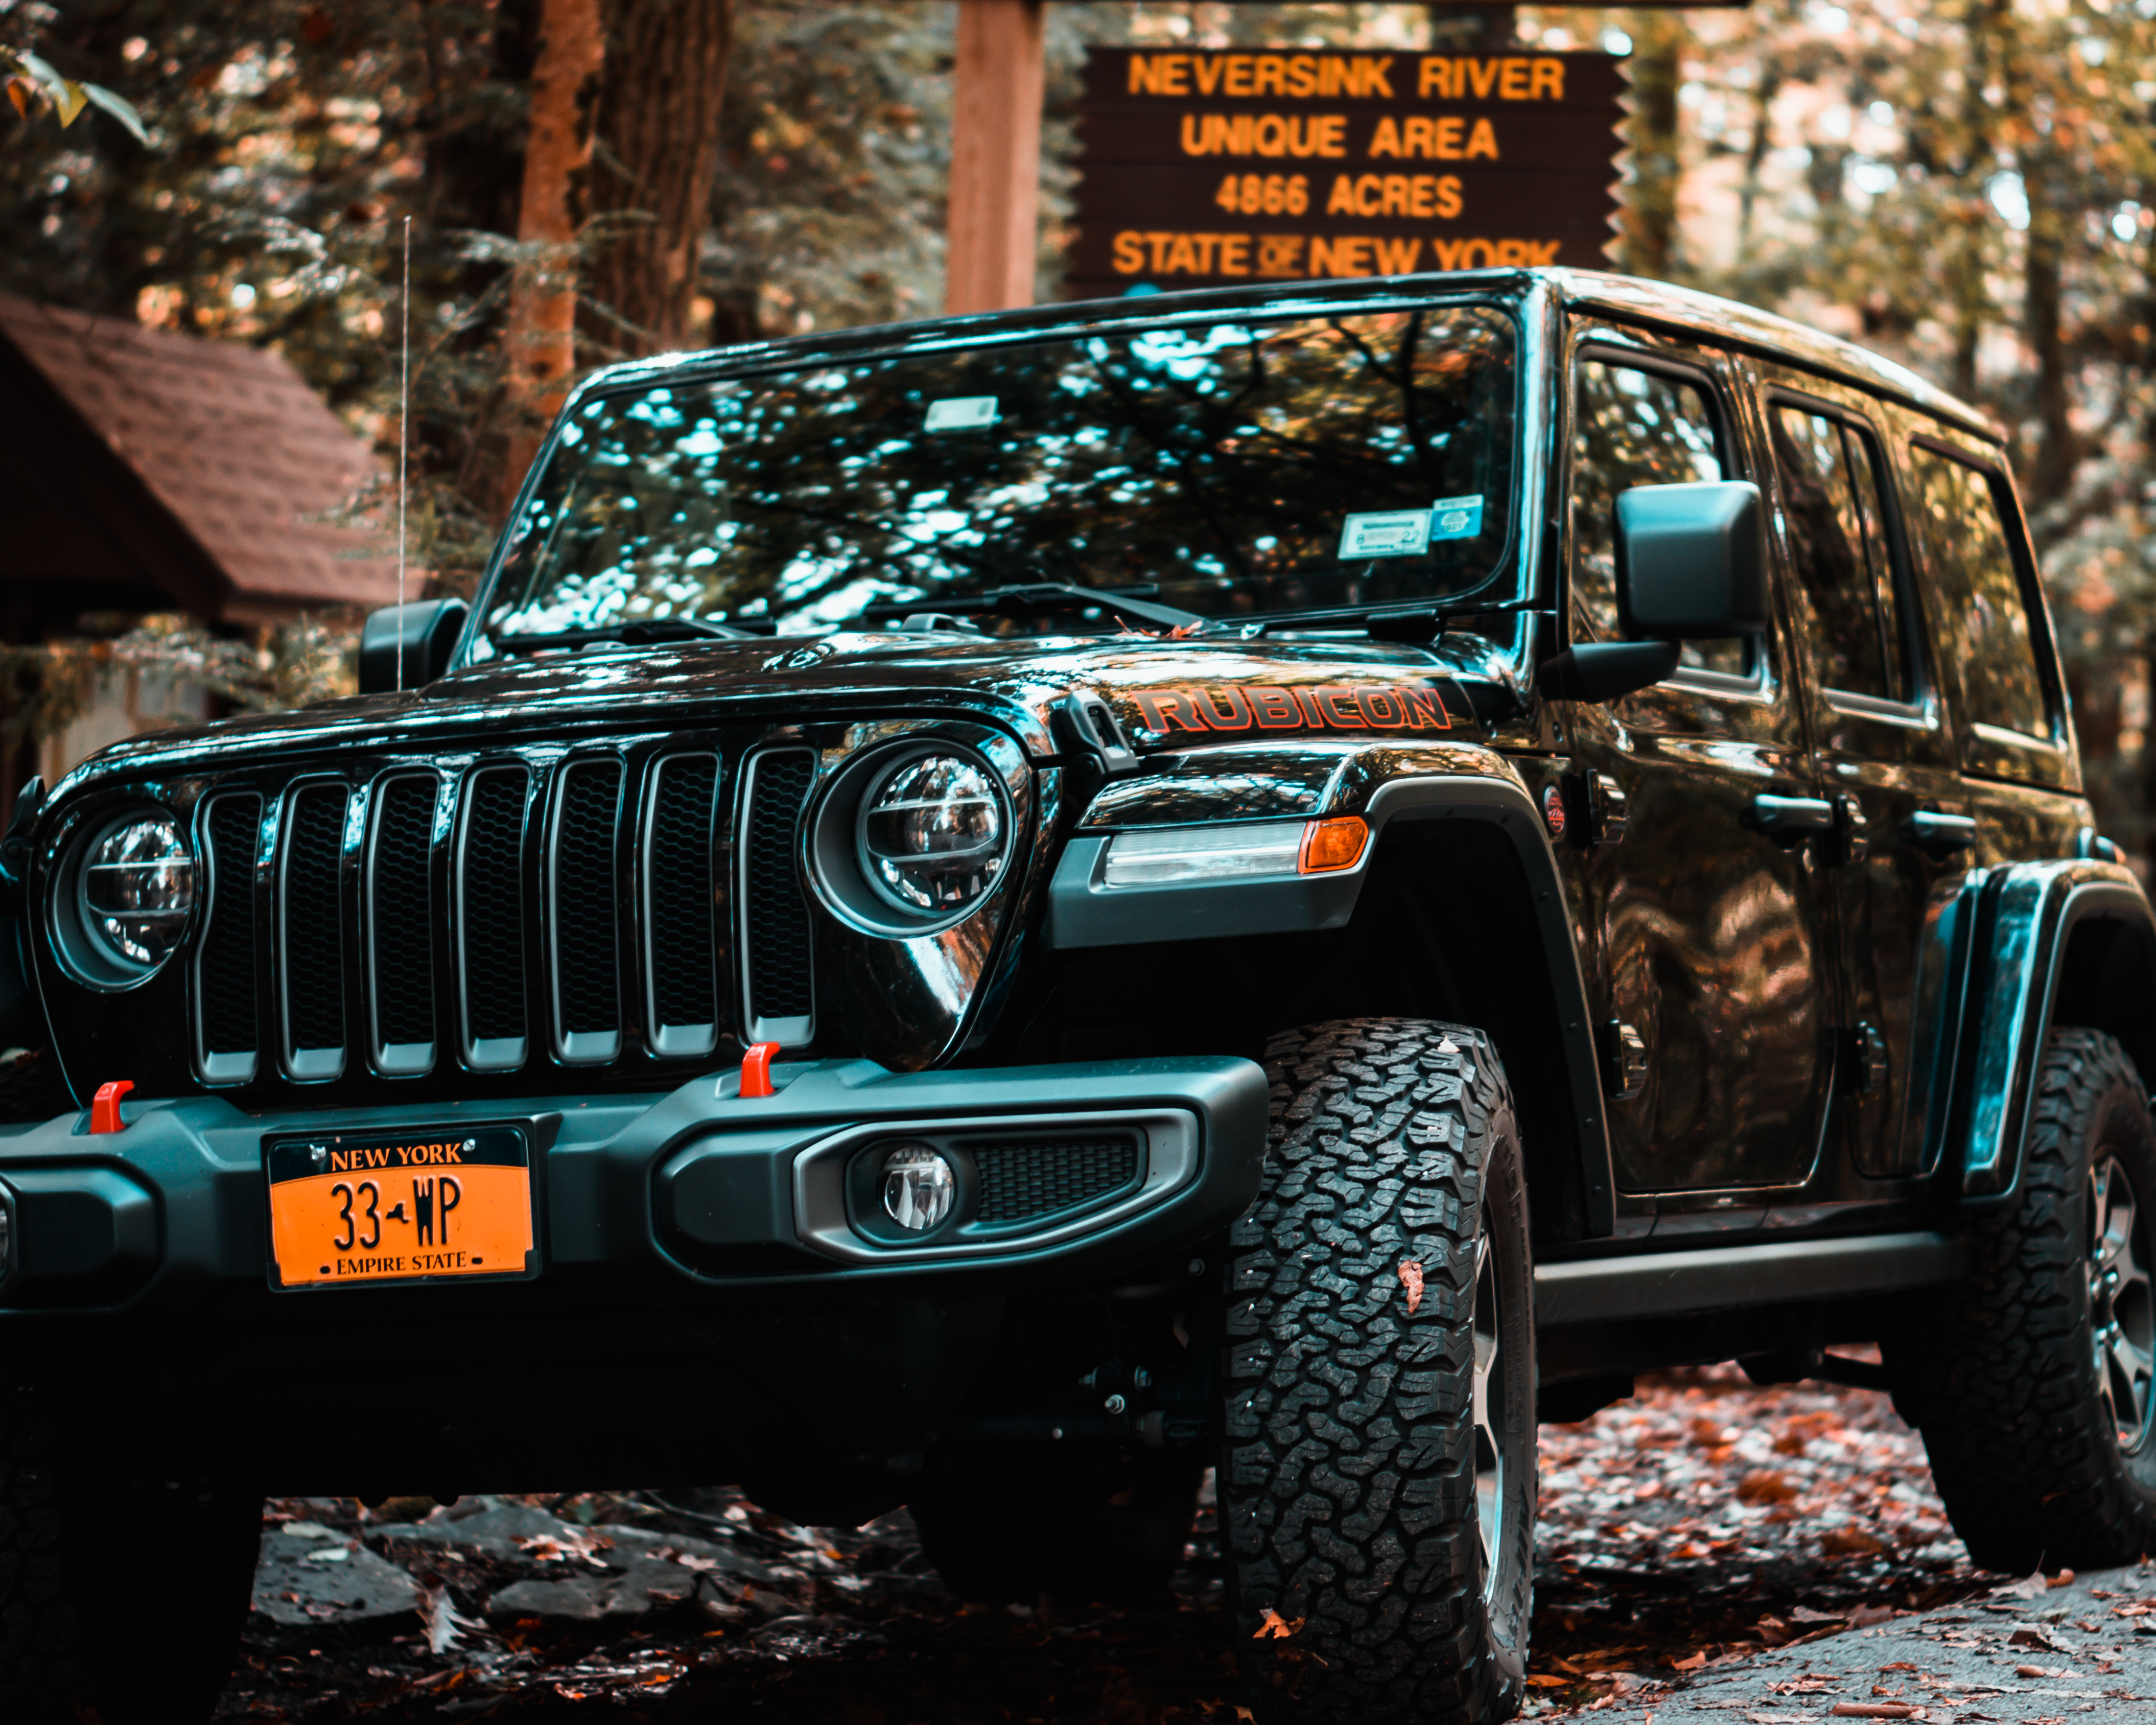 General 4220x3376 Jeep Jeep Wrangler Jeep Rubicon black cars car vehicle New York state USA sign numbers Stellantis